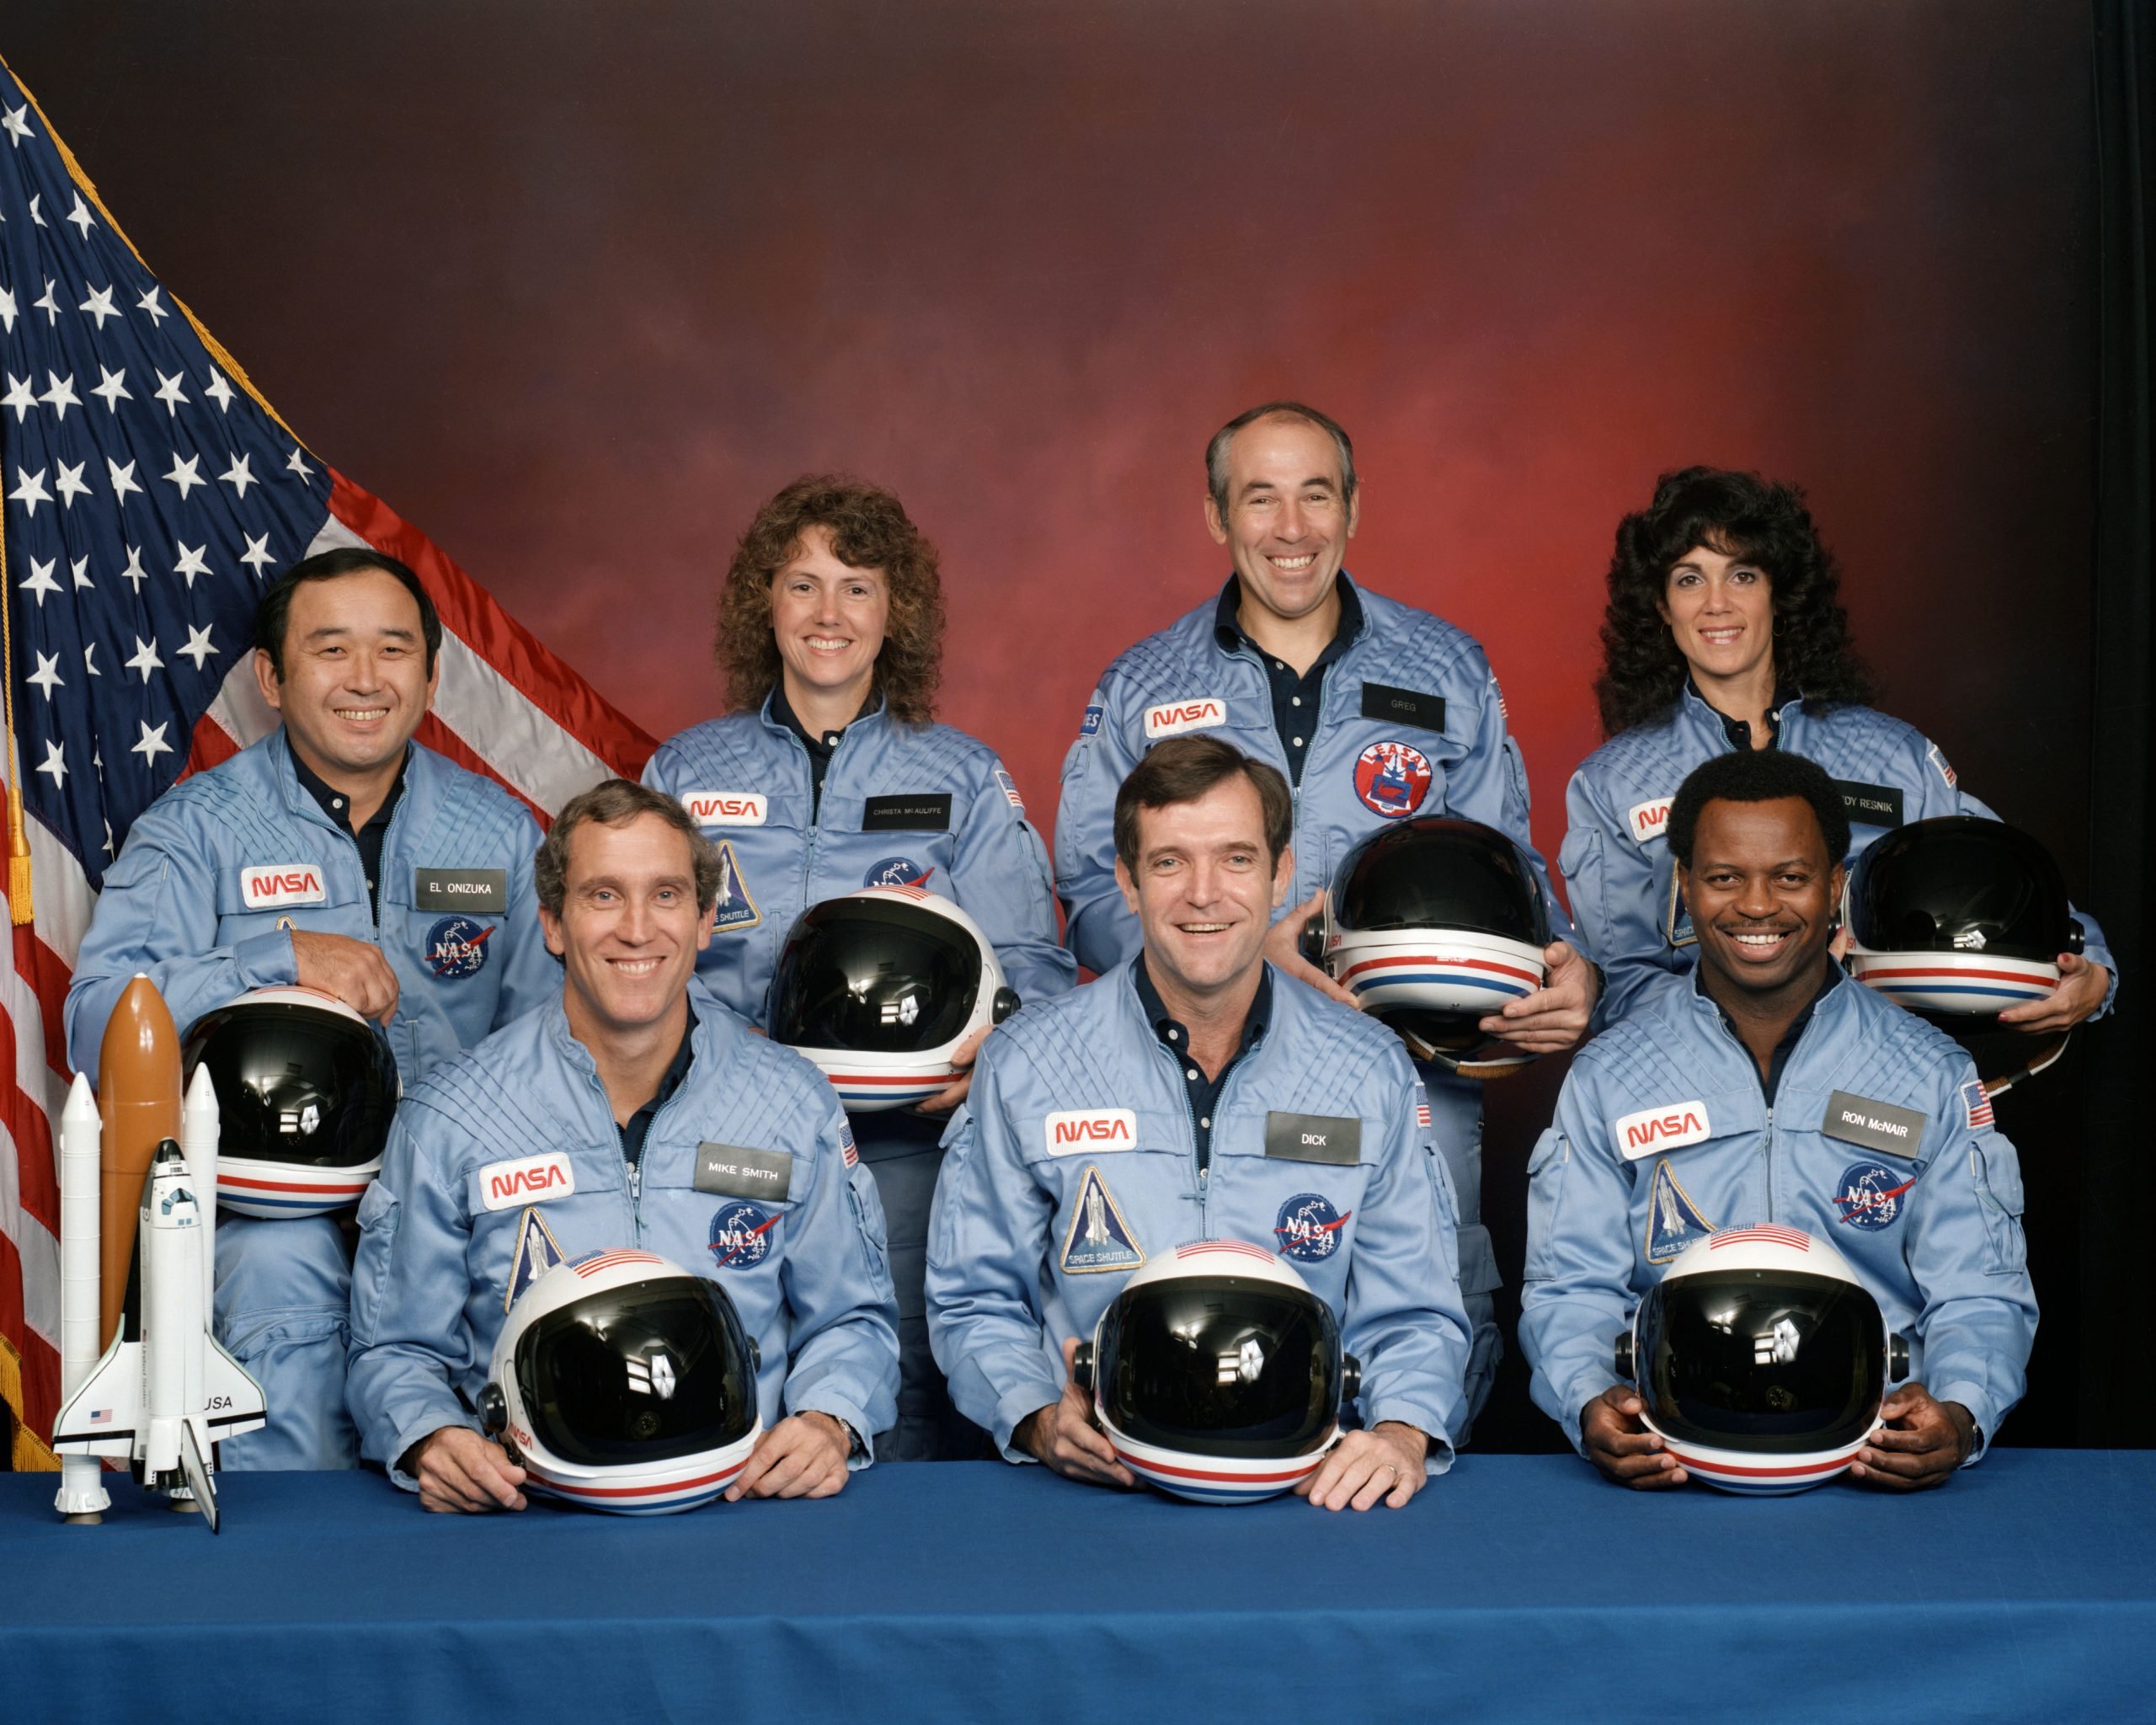 space shuttle challenger disaster of 1986